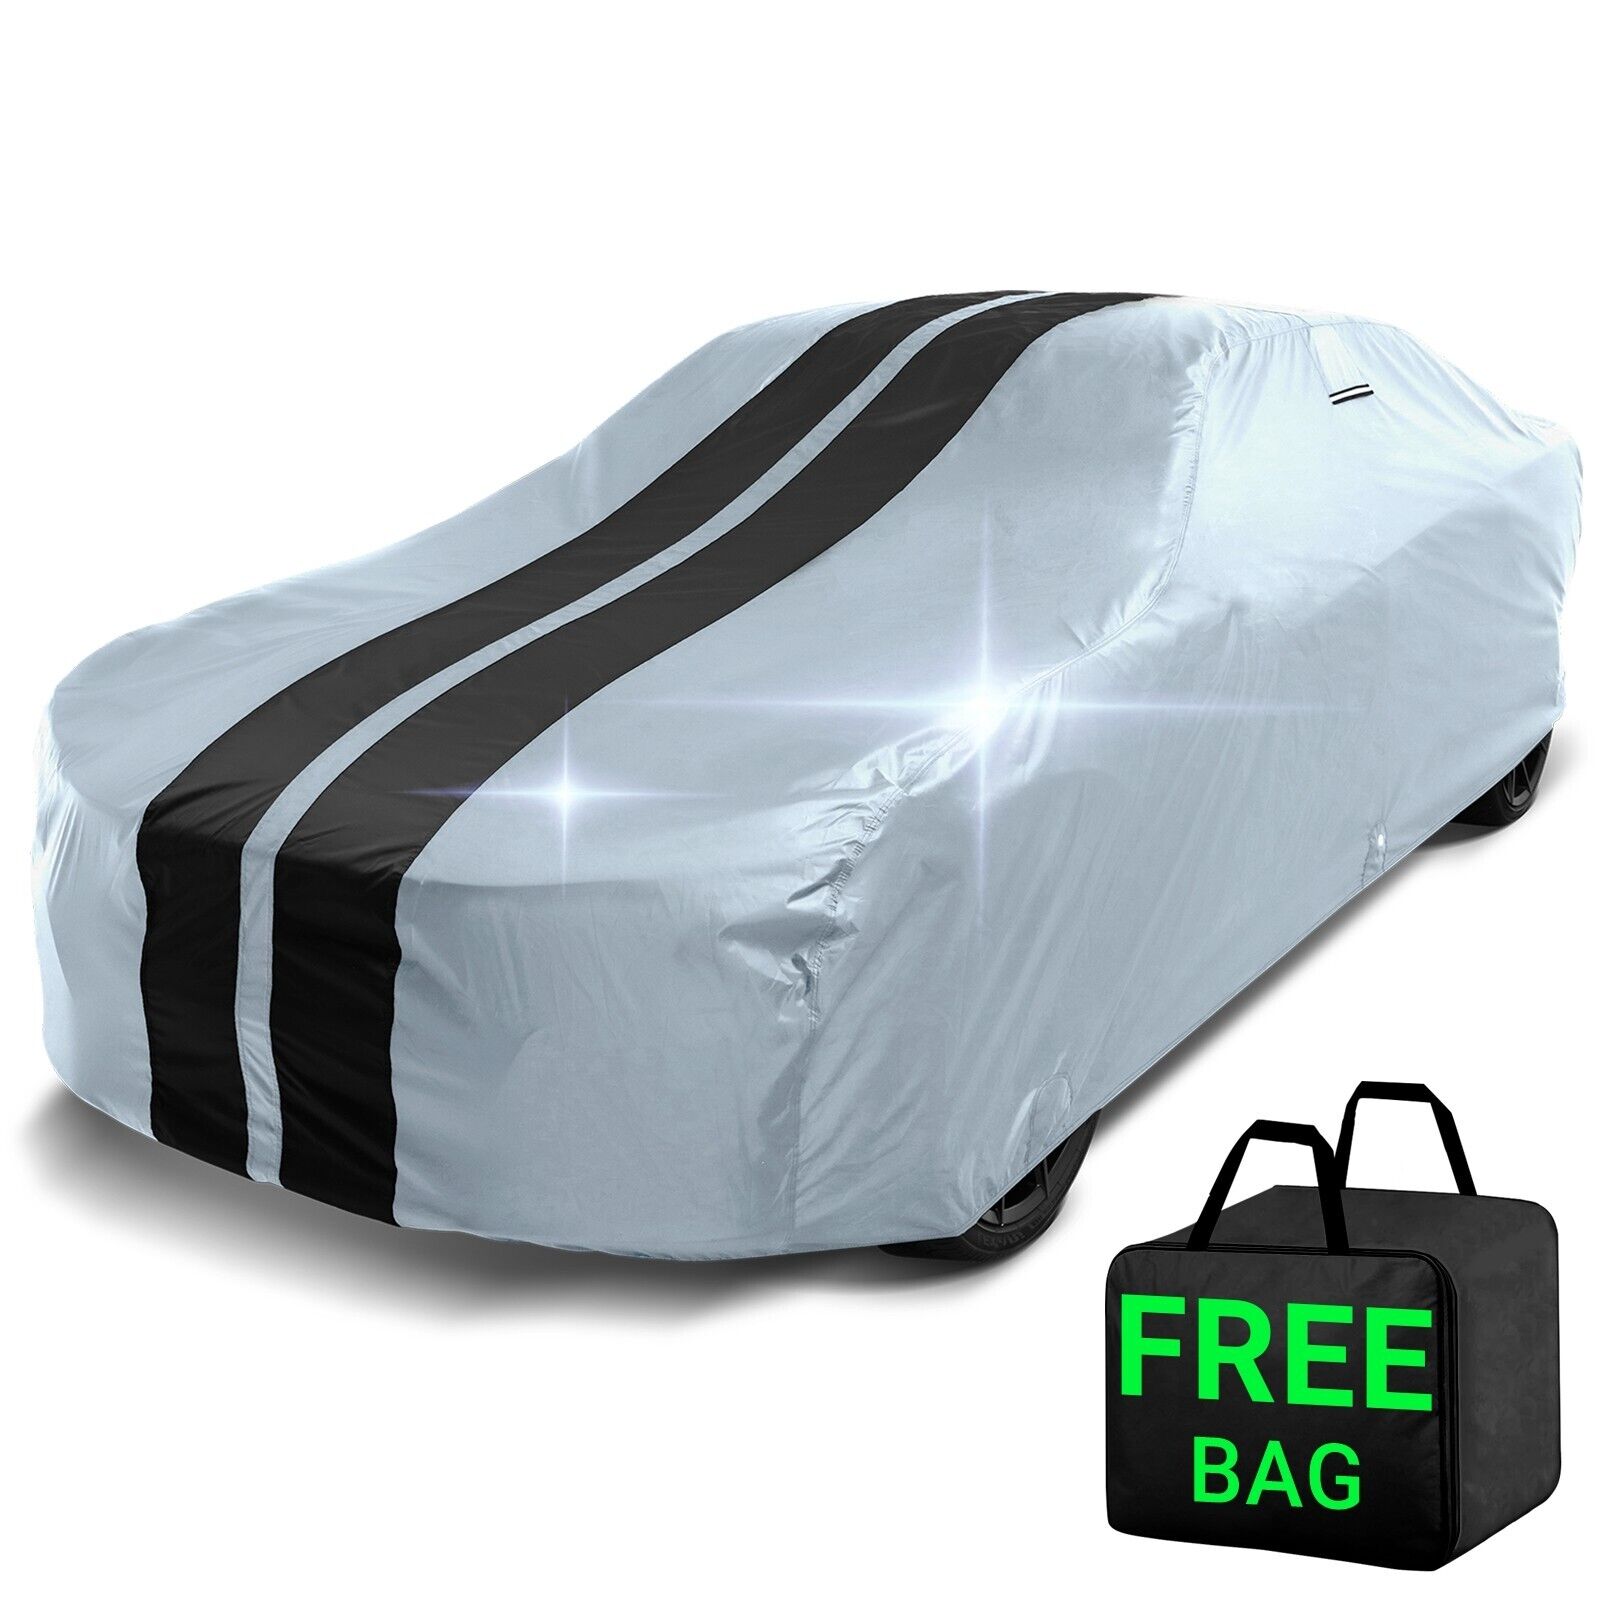 1976-2004 Lotus Esprit Custom Car Cover - All-Weather Waterproof Protection